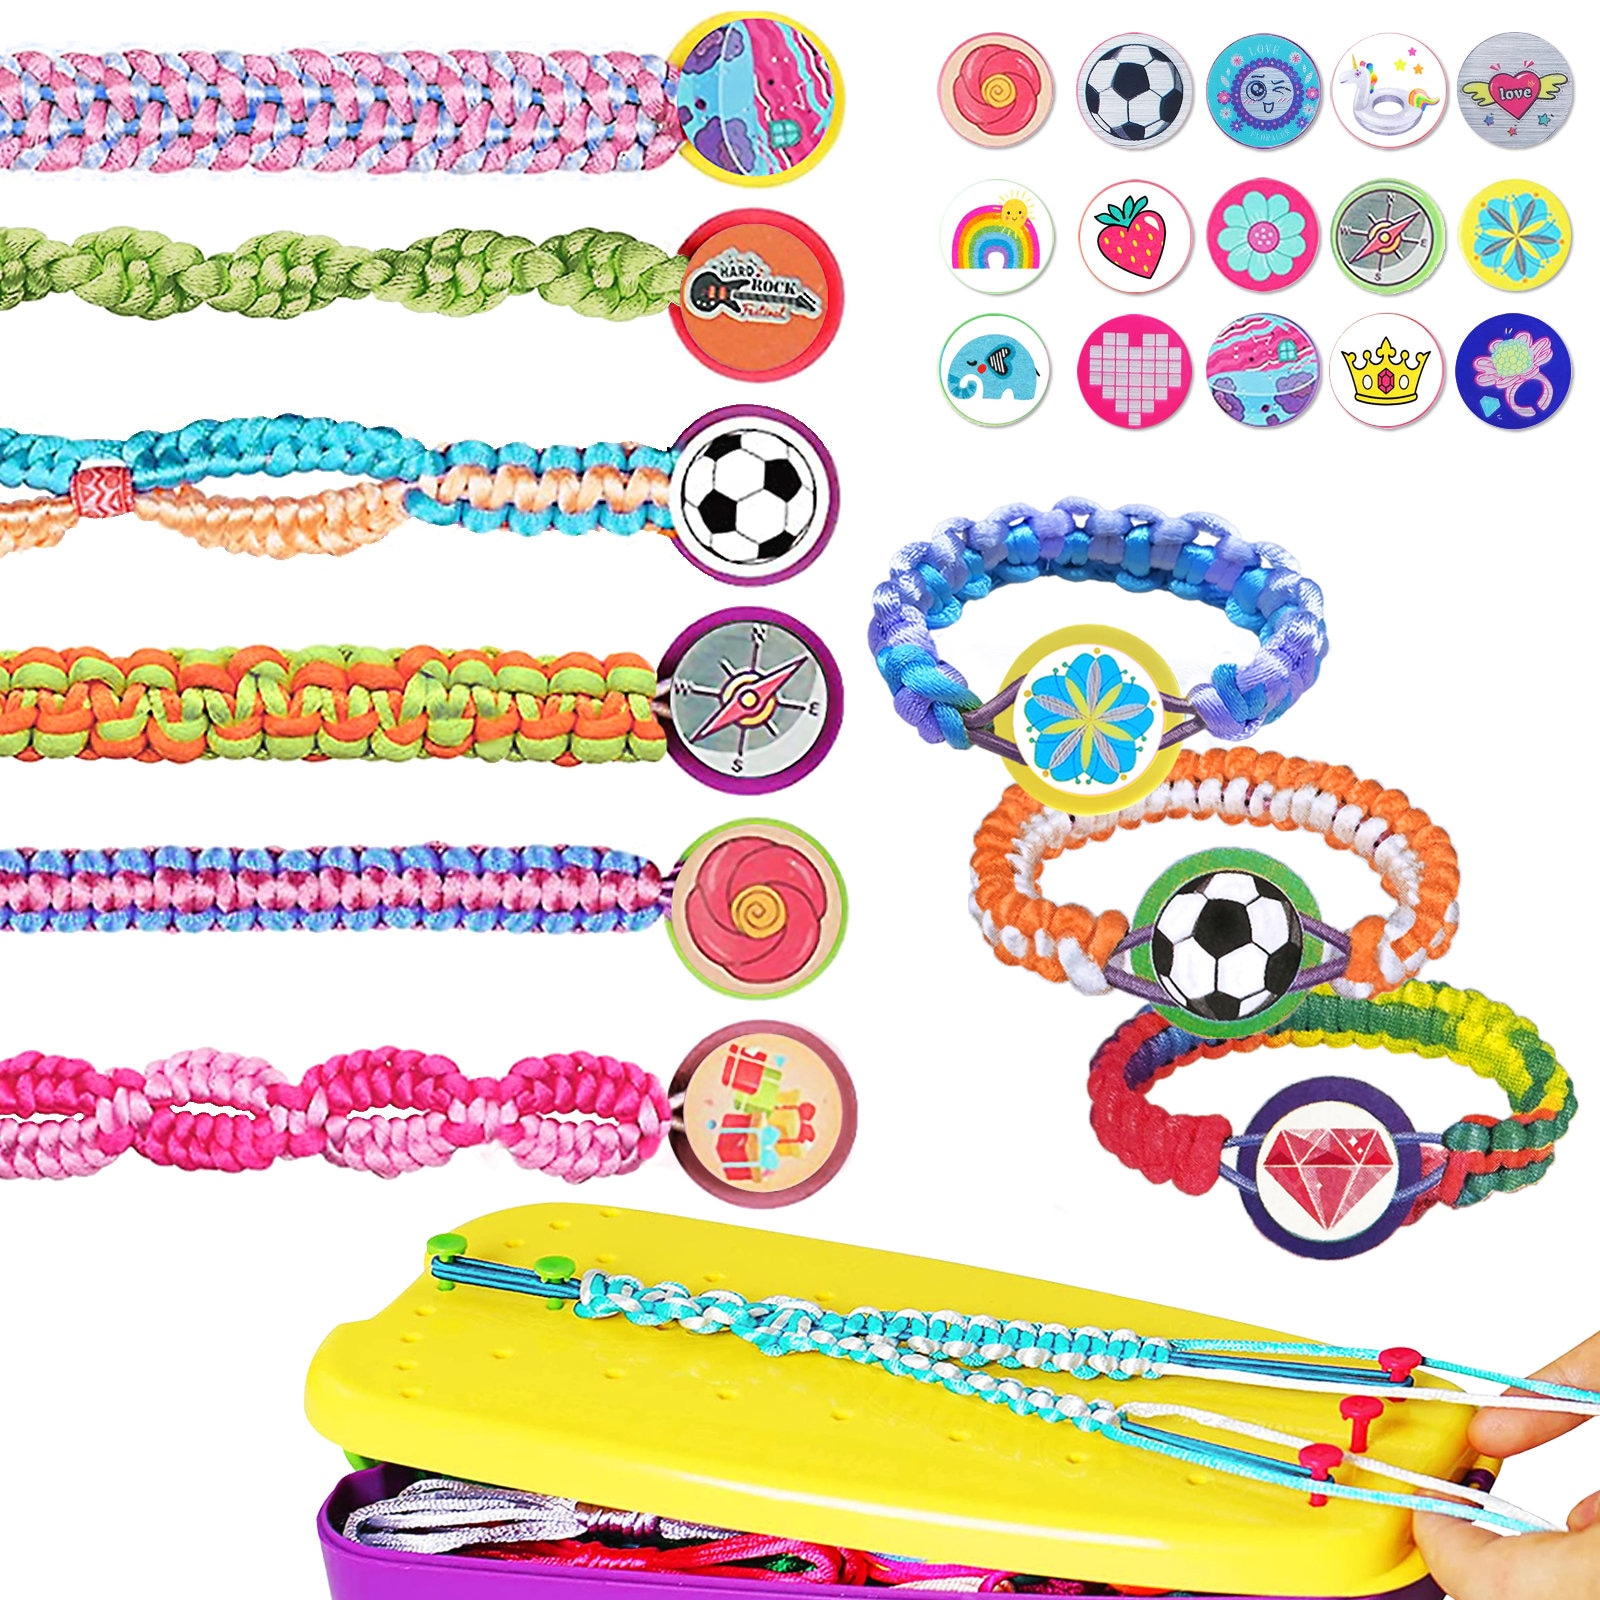 Friendship Bracelet Making Kit,Arts and Crafts for Kids Ages 8-12,DIY  Bracelet Making Kit with 20 Pre-Cut Threads,Birthday Gifts for Girl Aged 6  7 8 9 10 11 12 Year Old Kids Travel Activity Set